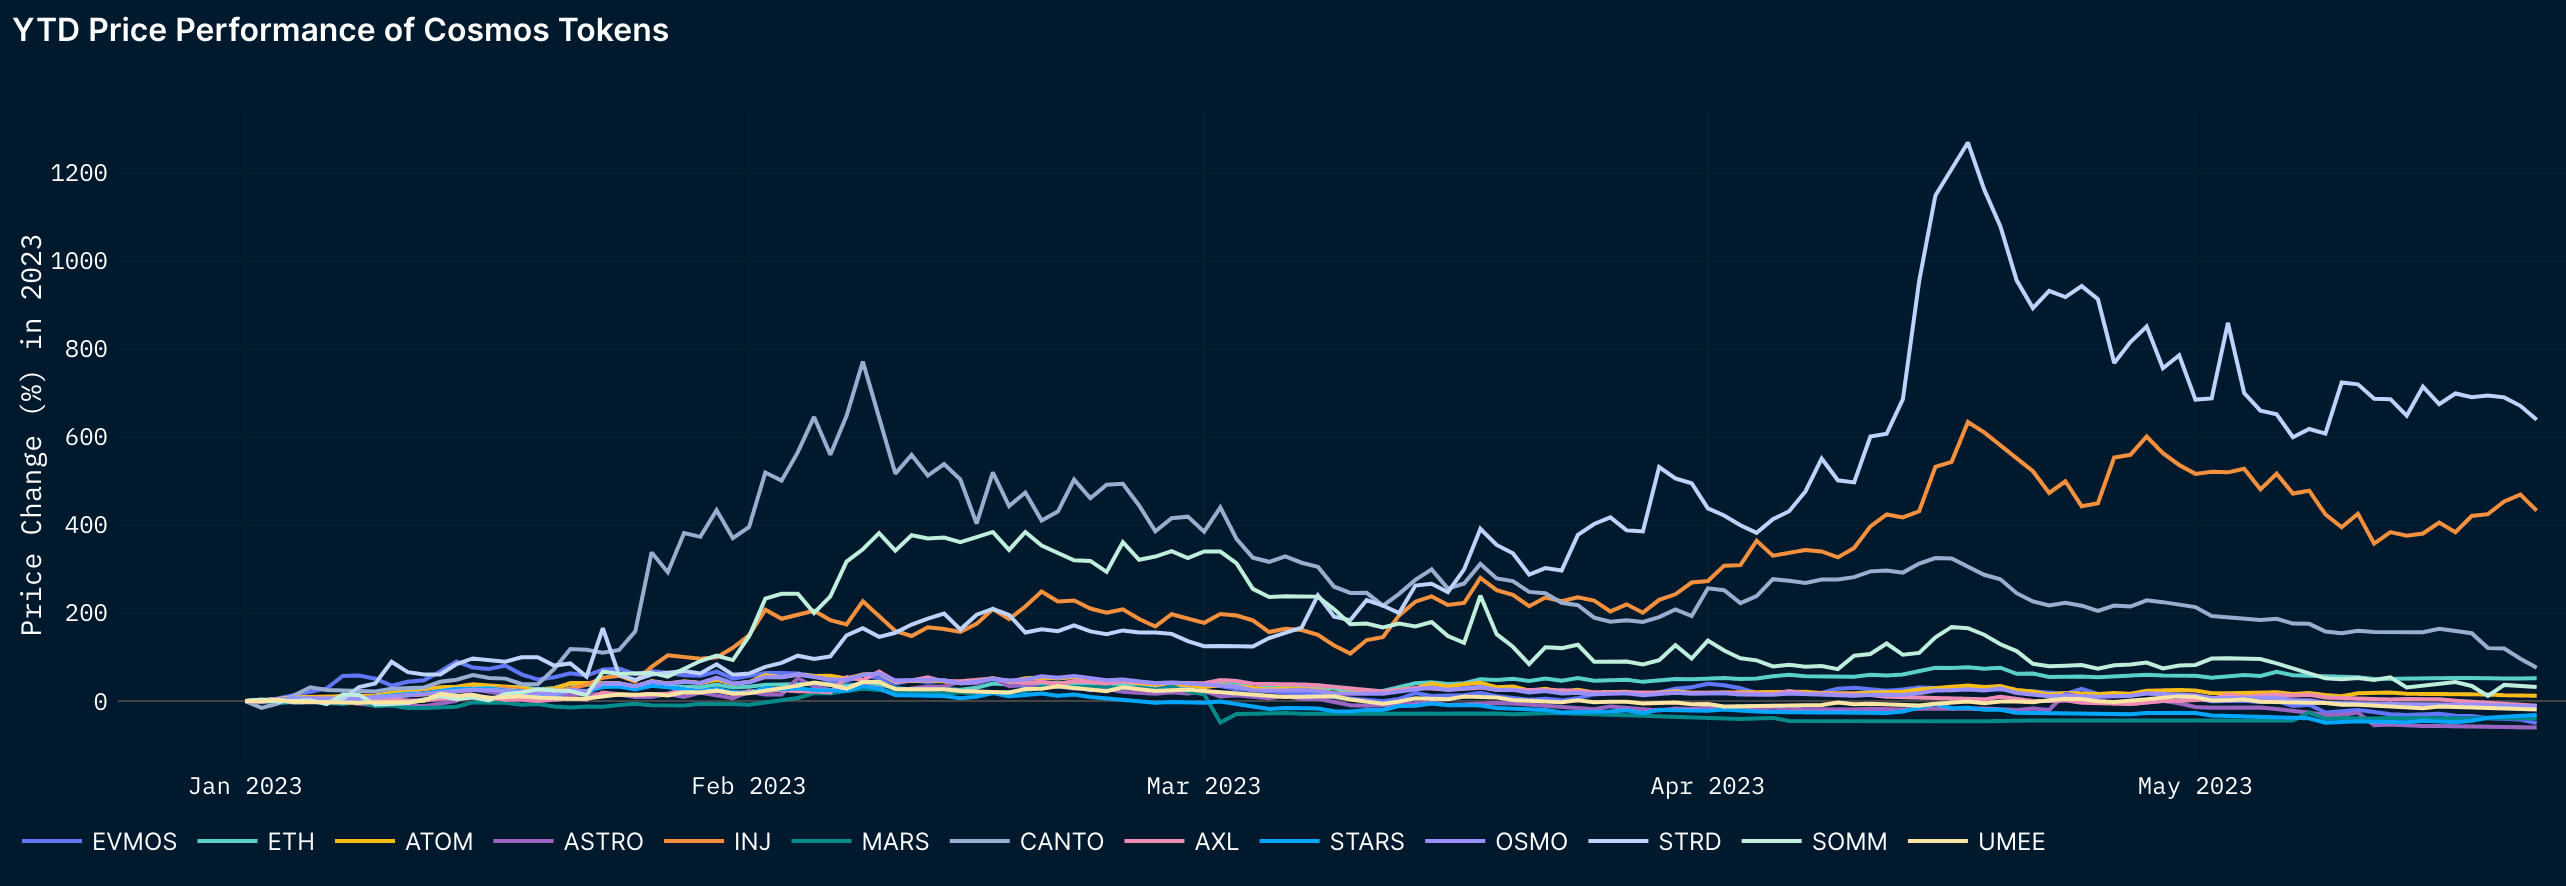 Cosmos Tokens YTD Outperformance image